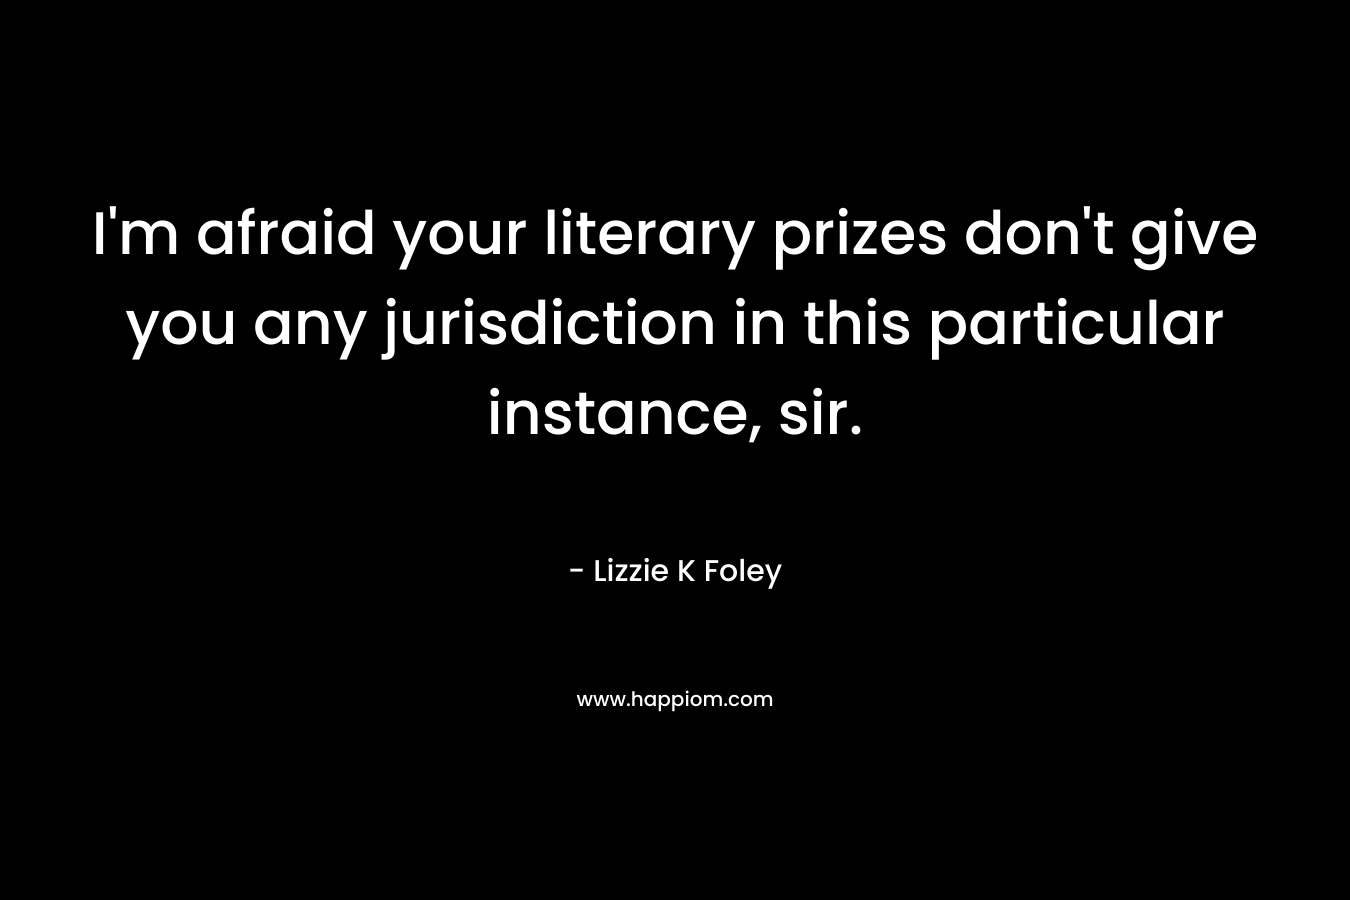 I’m afraid your literary prizes don’t give you any jurisdiction in this particular instance, sir. – Lizzie K Foley